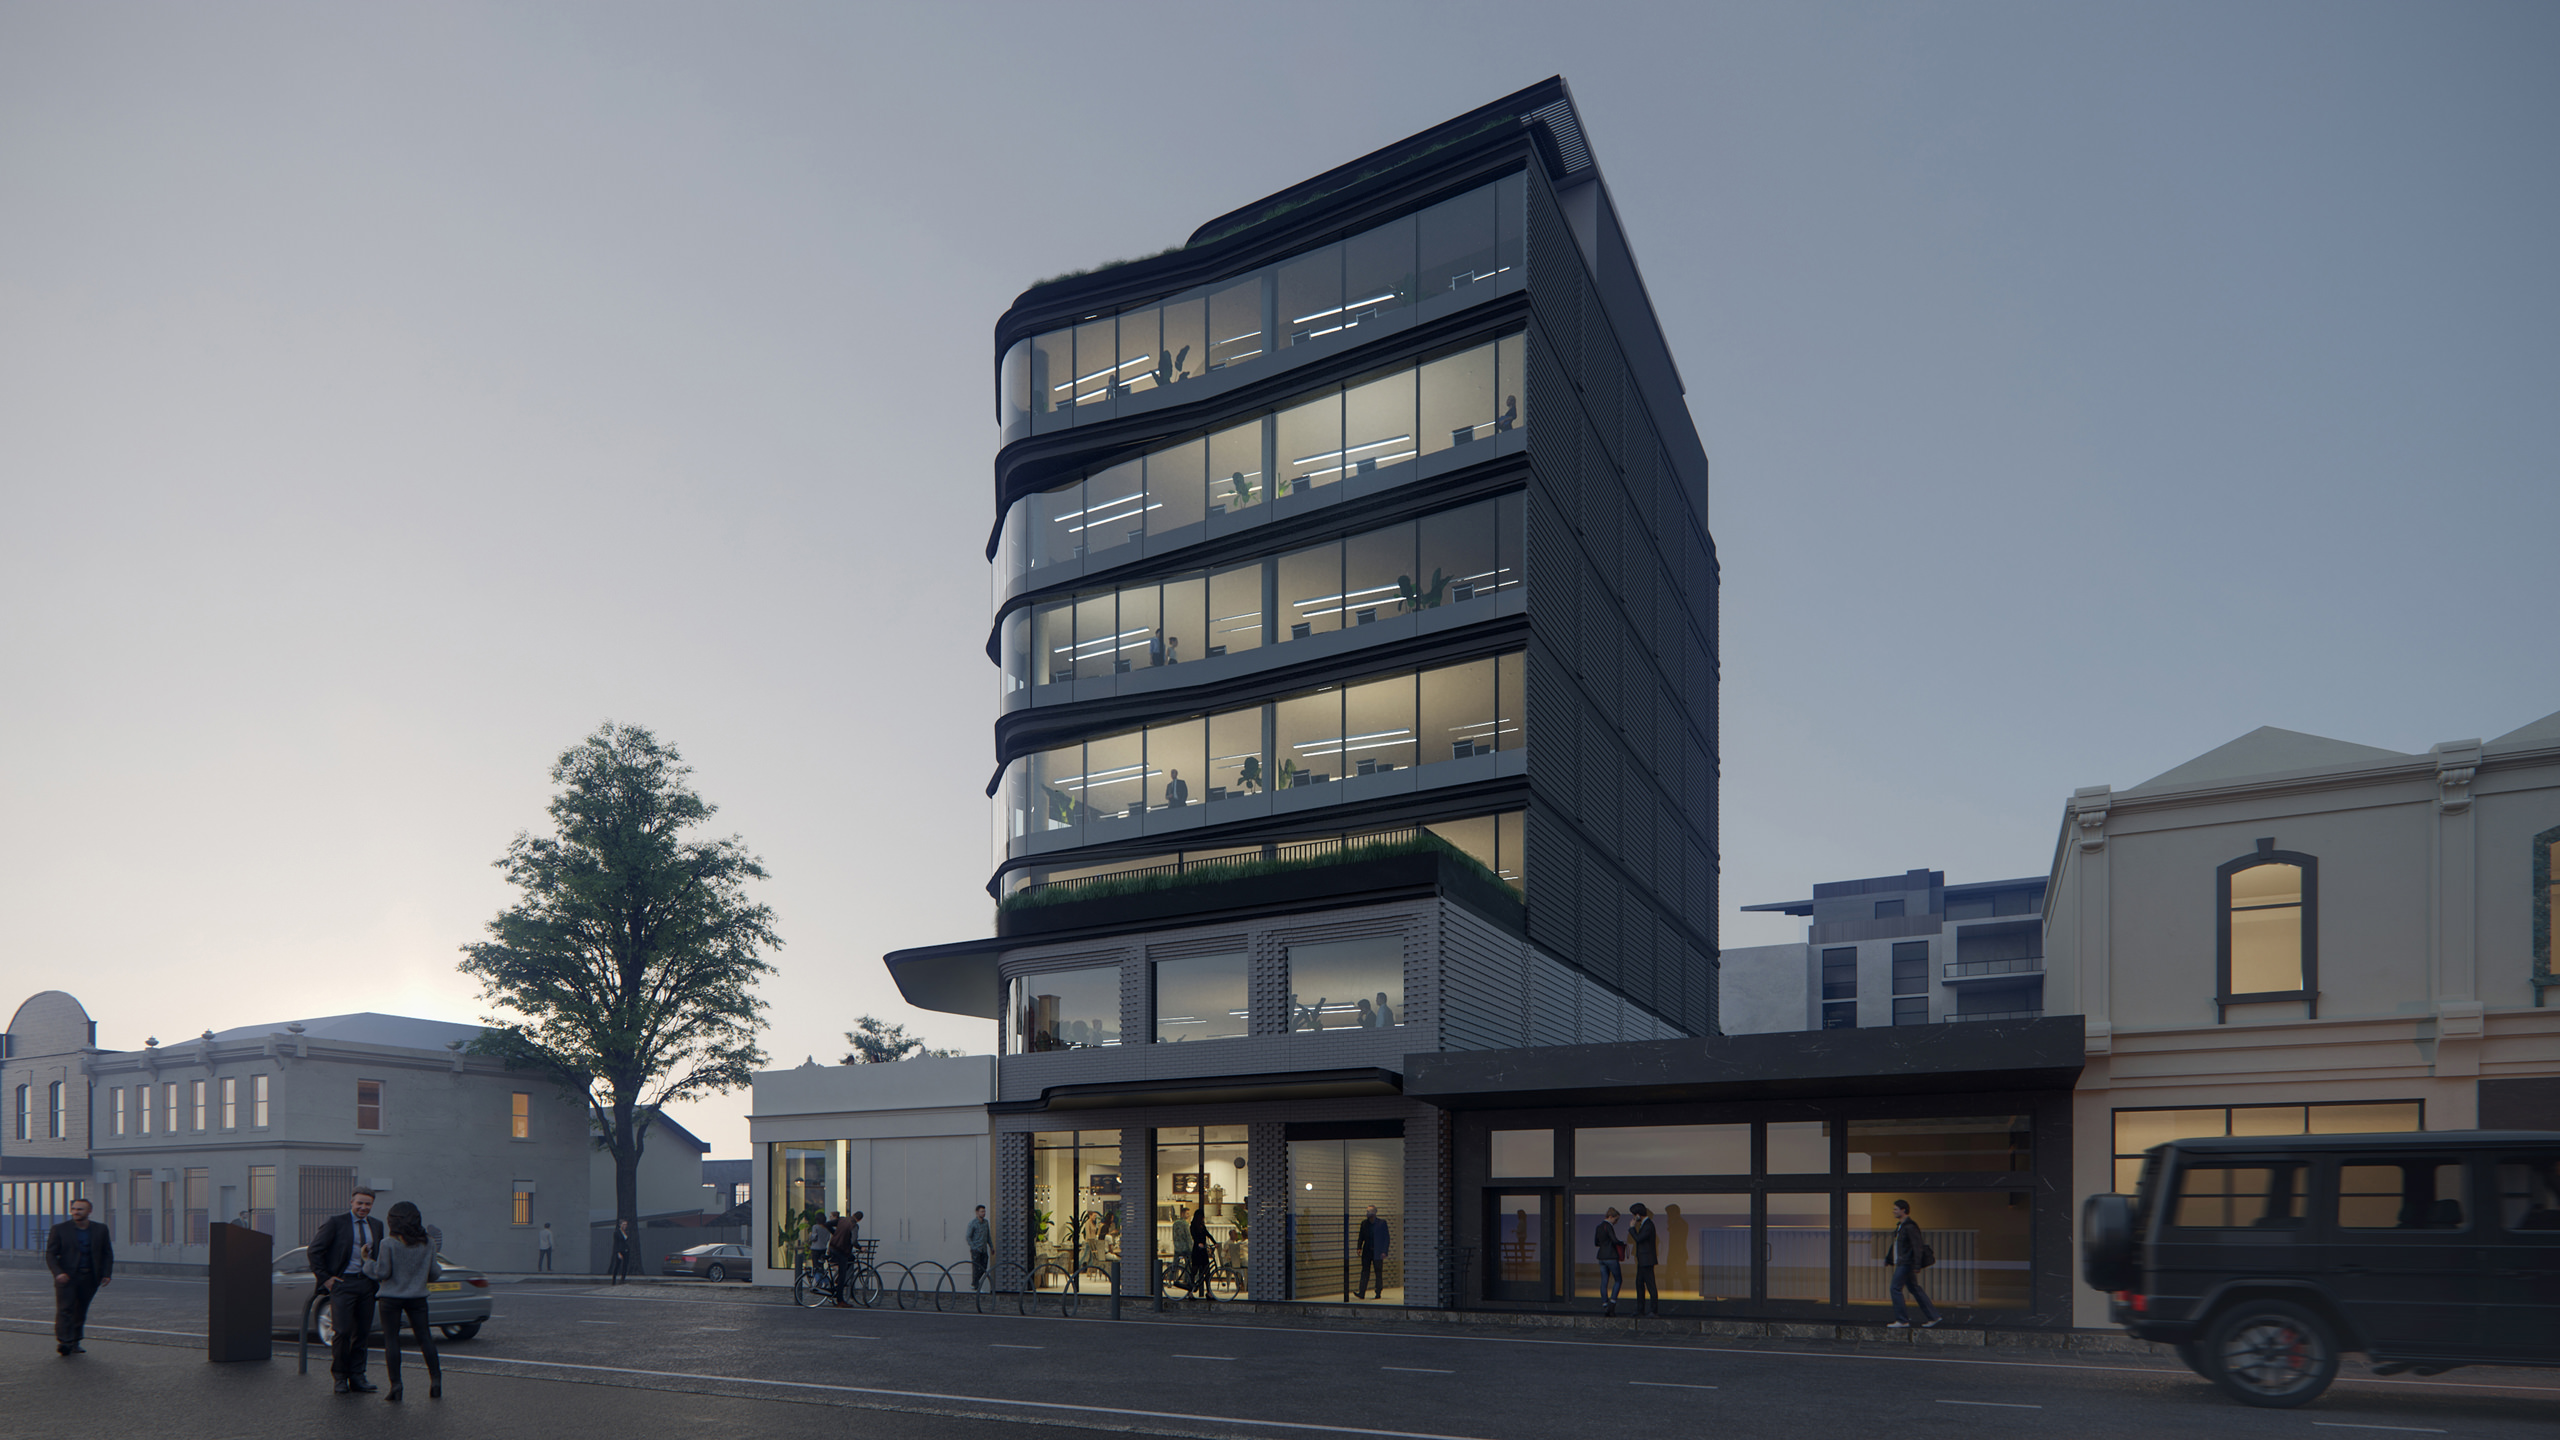 Dusk 3D view of the building glass facade with visible interiors